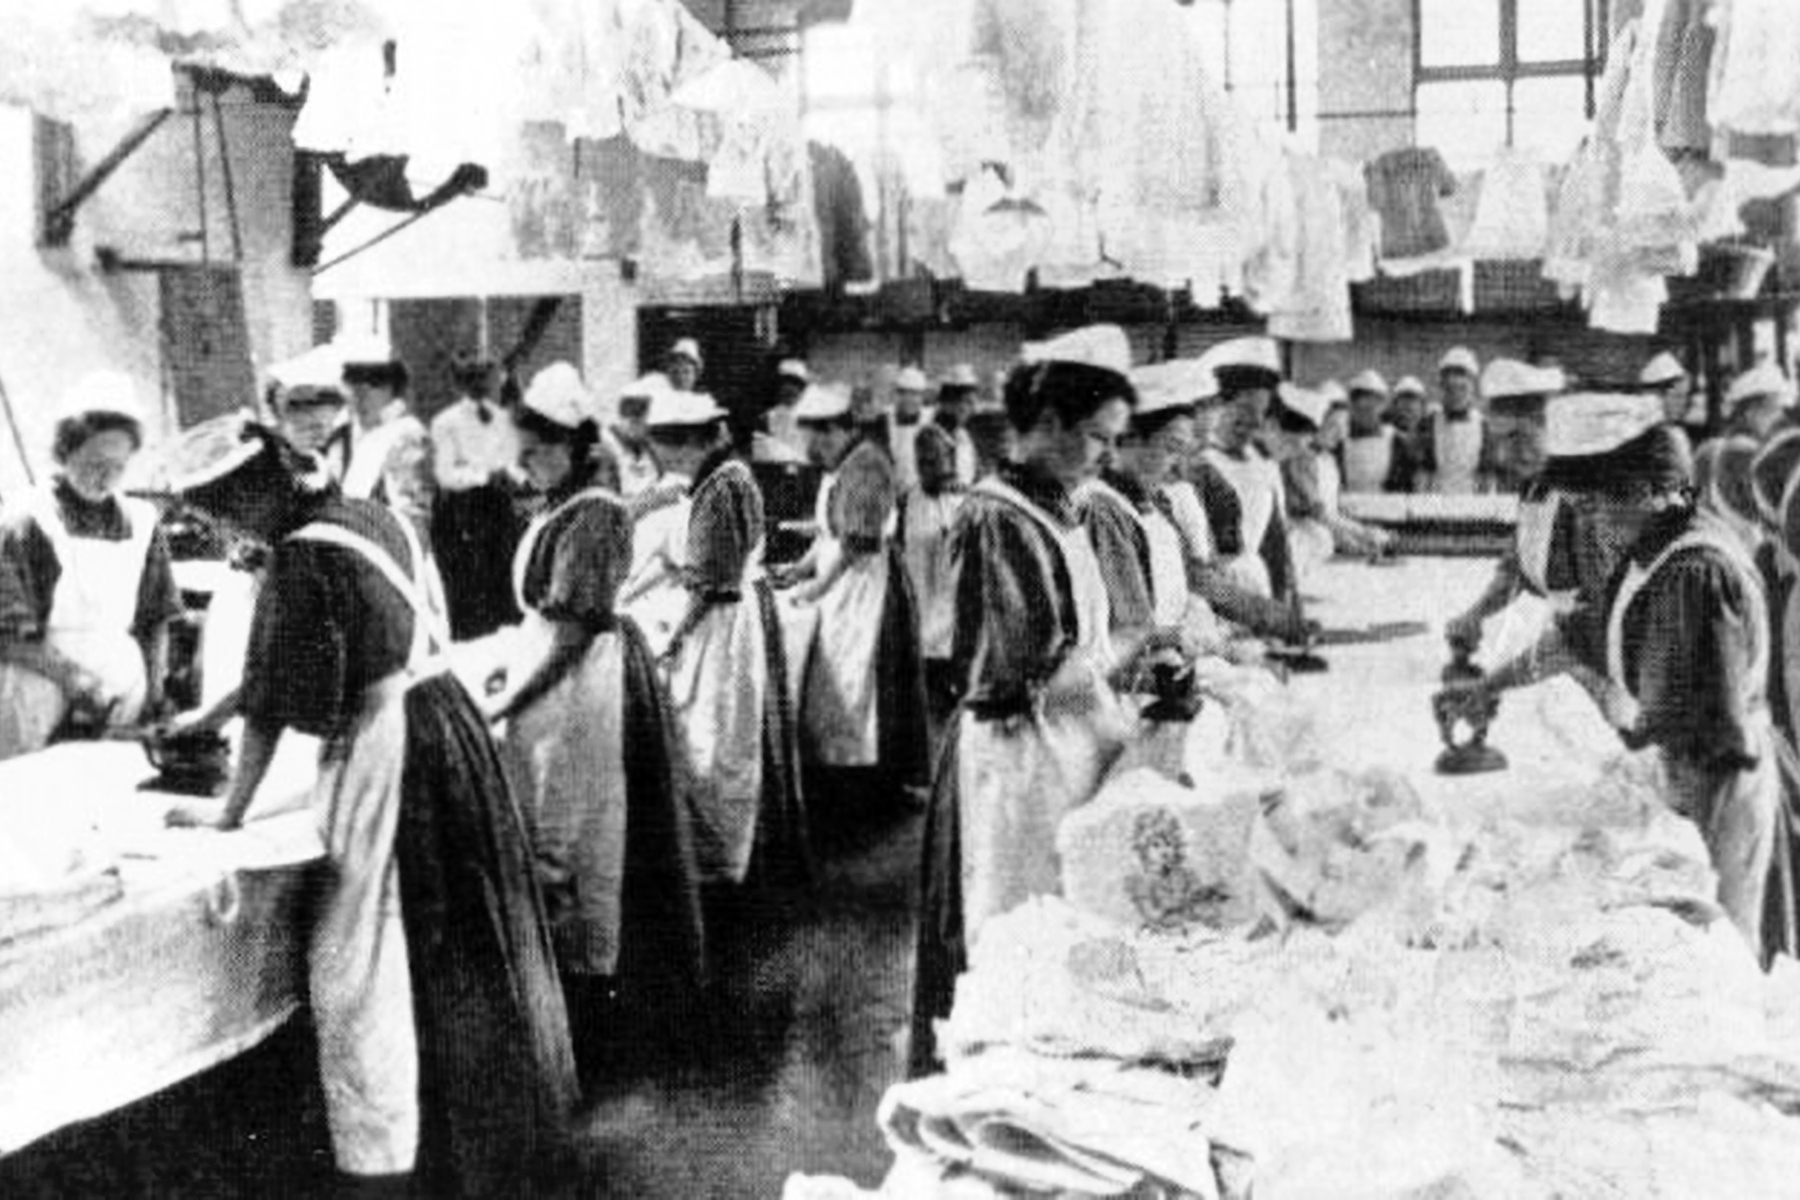 An undated image of women in a Magdalene Laundry where they are seen ironing clothes.